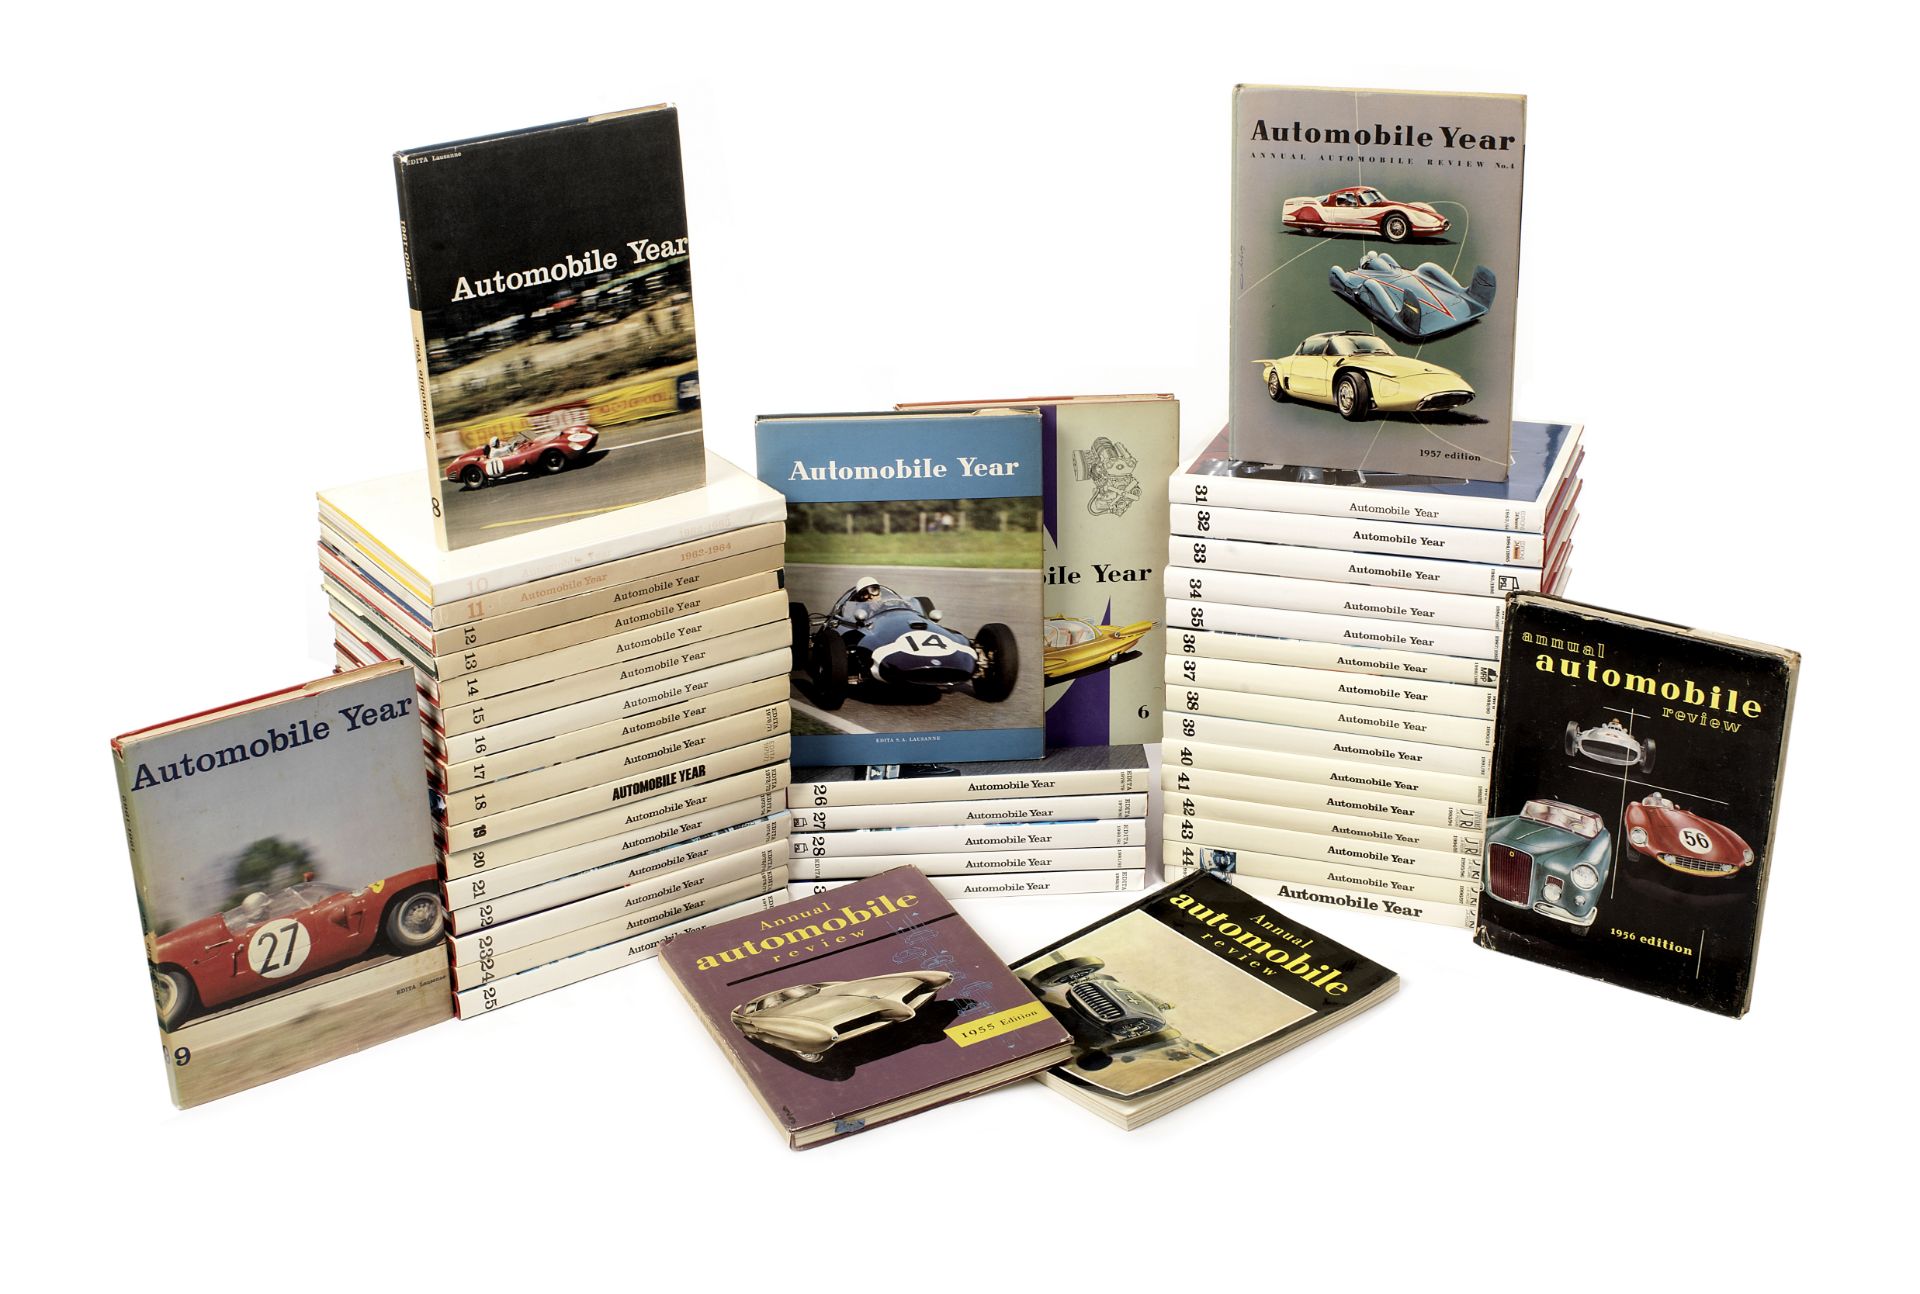 Automobile Review/Automobile Year; a complete run of annuals 1 to 45 (1953/54 to 1997/98), ((45))